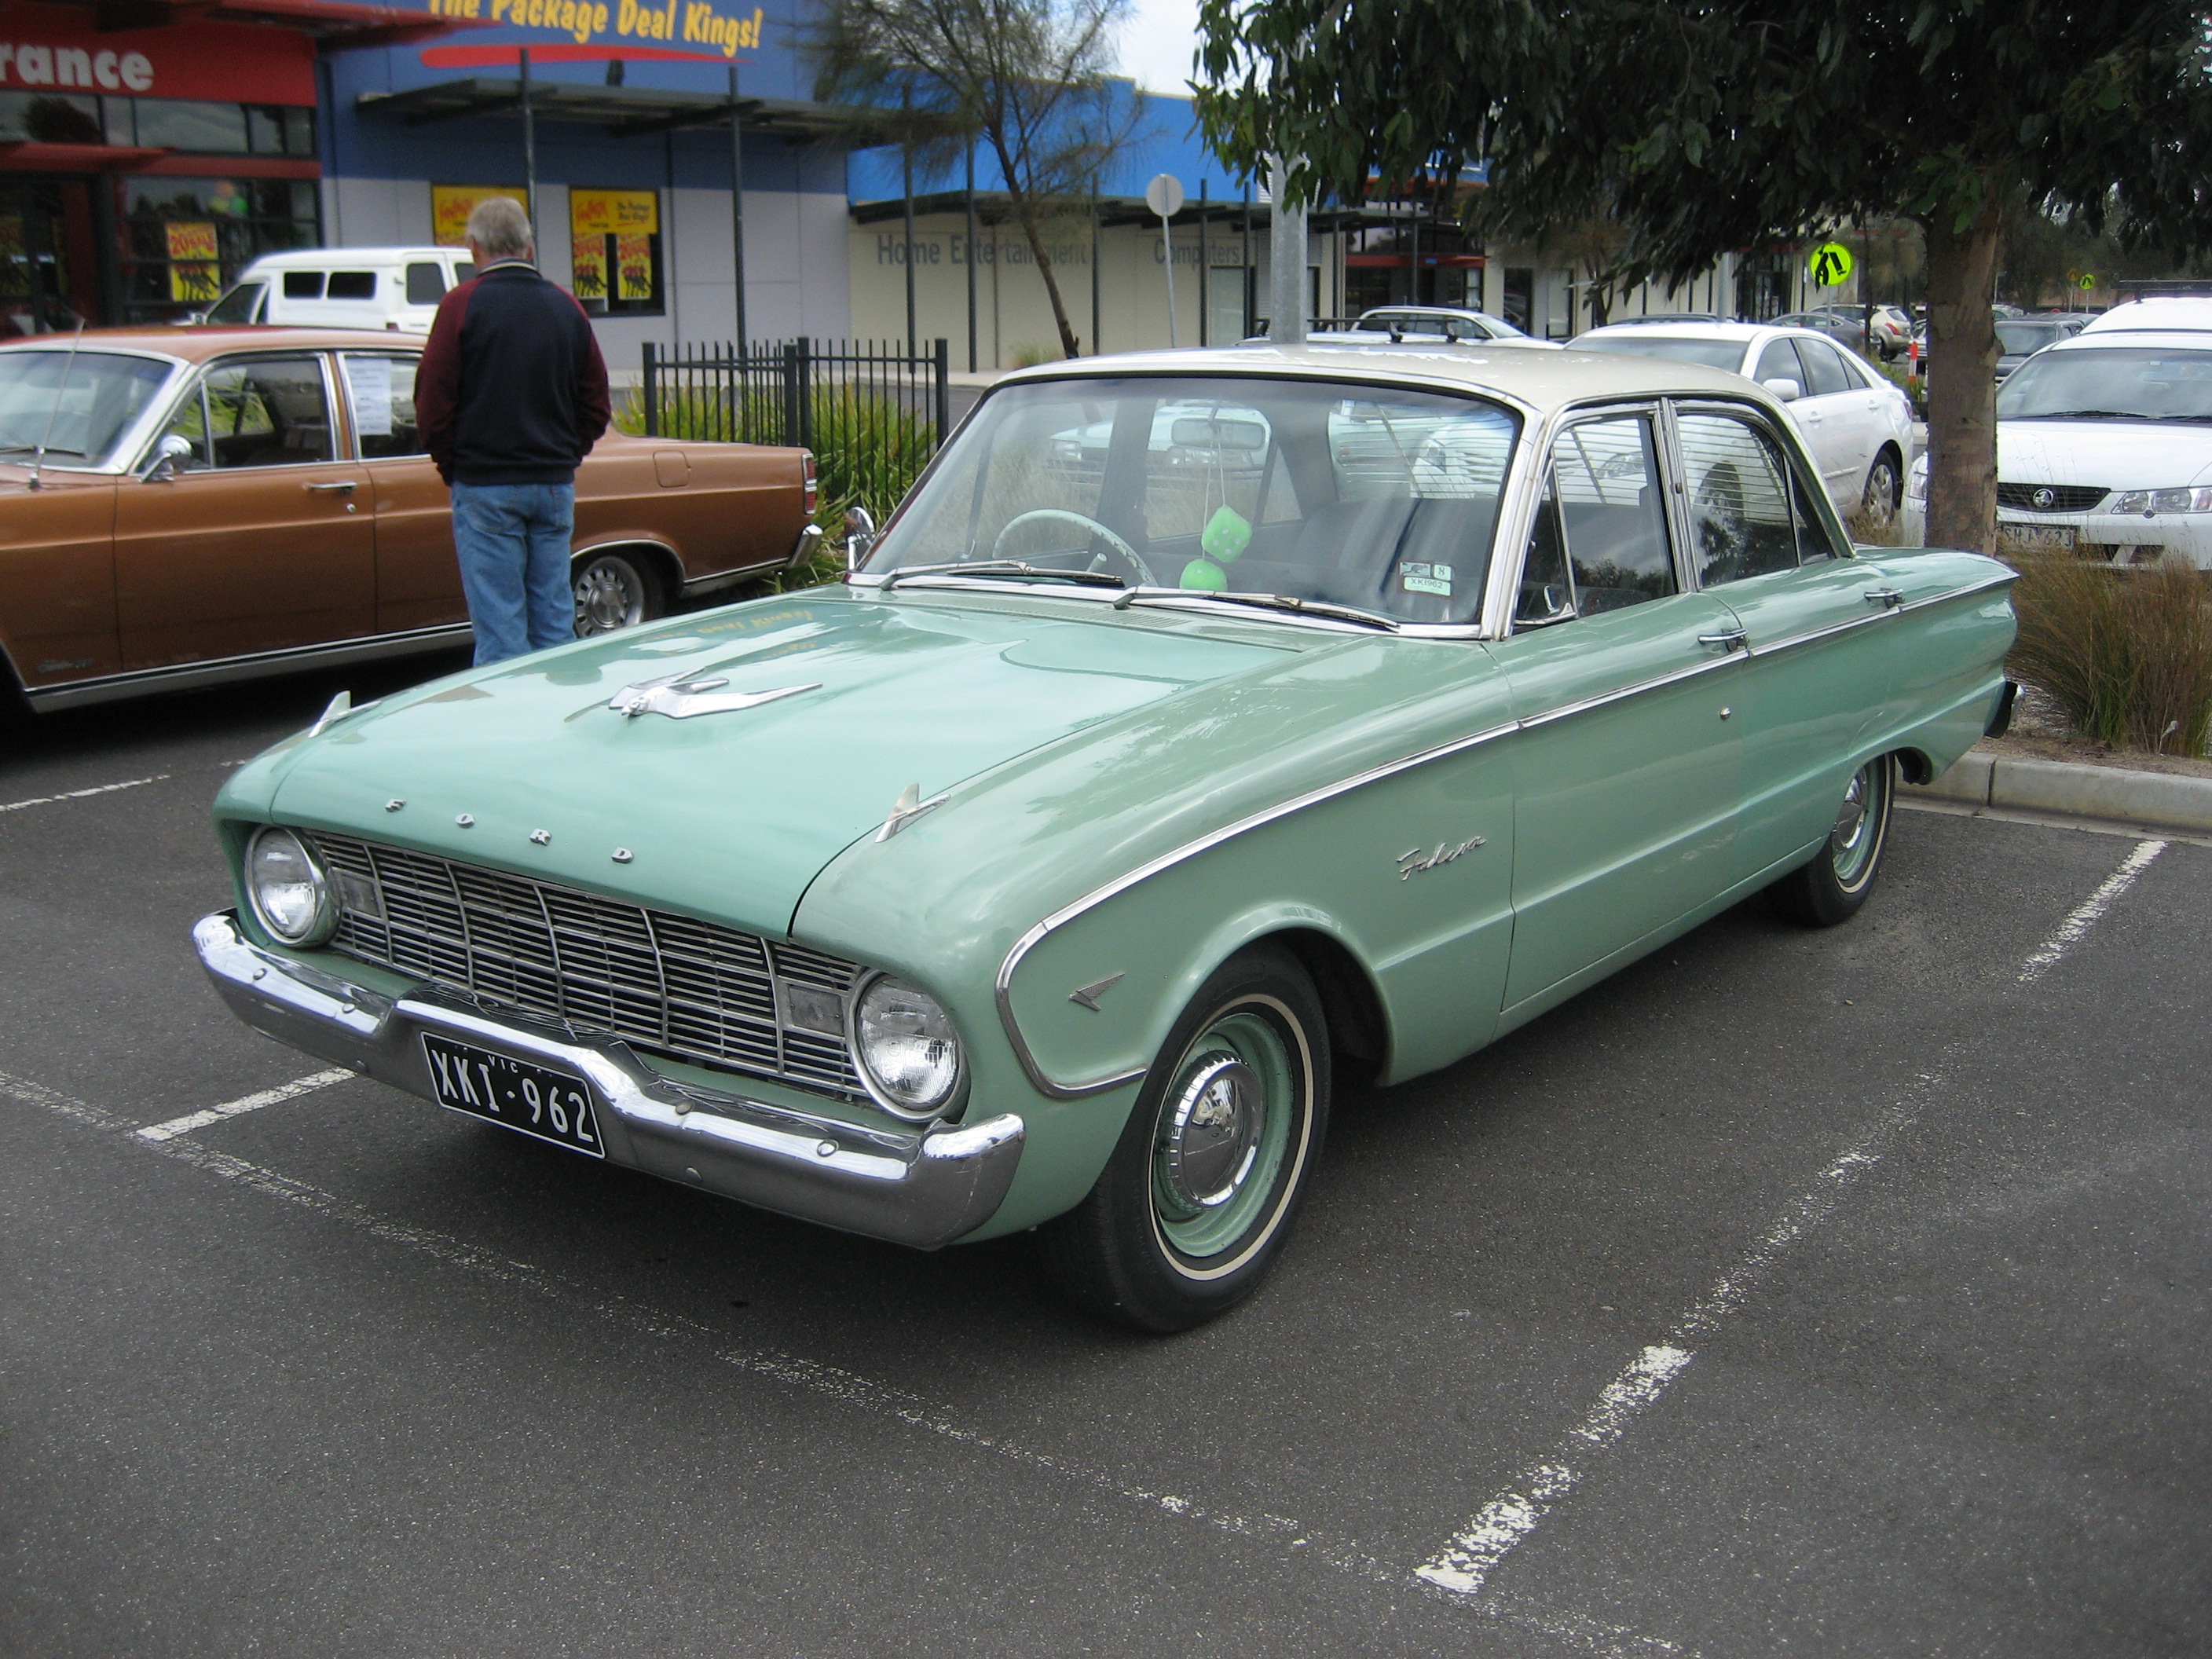 Ford Sedan Delivery 1962 #5